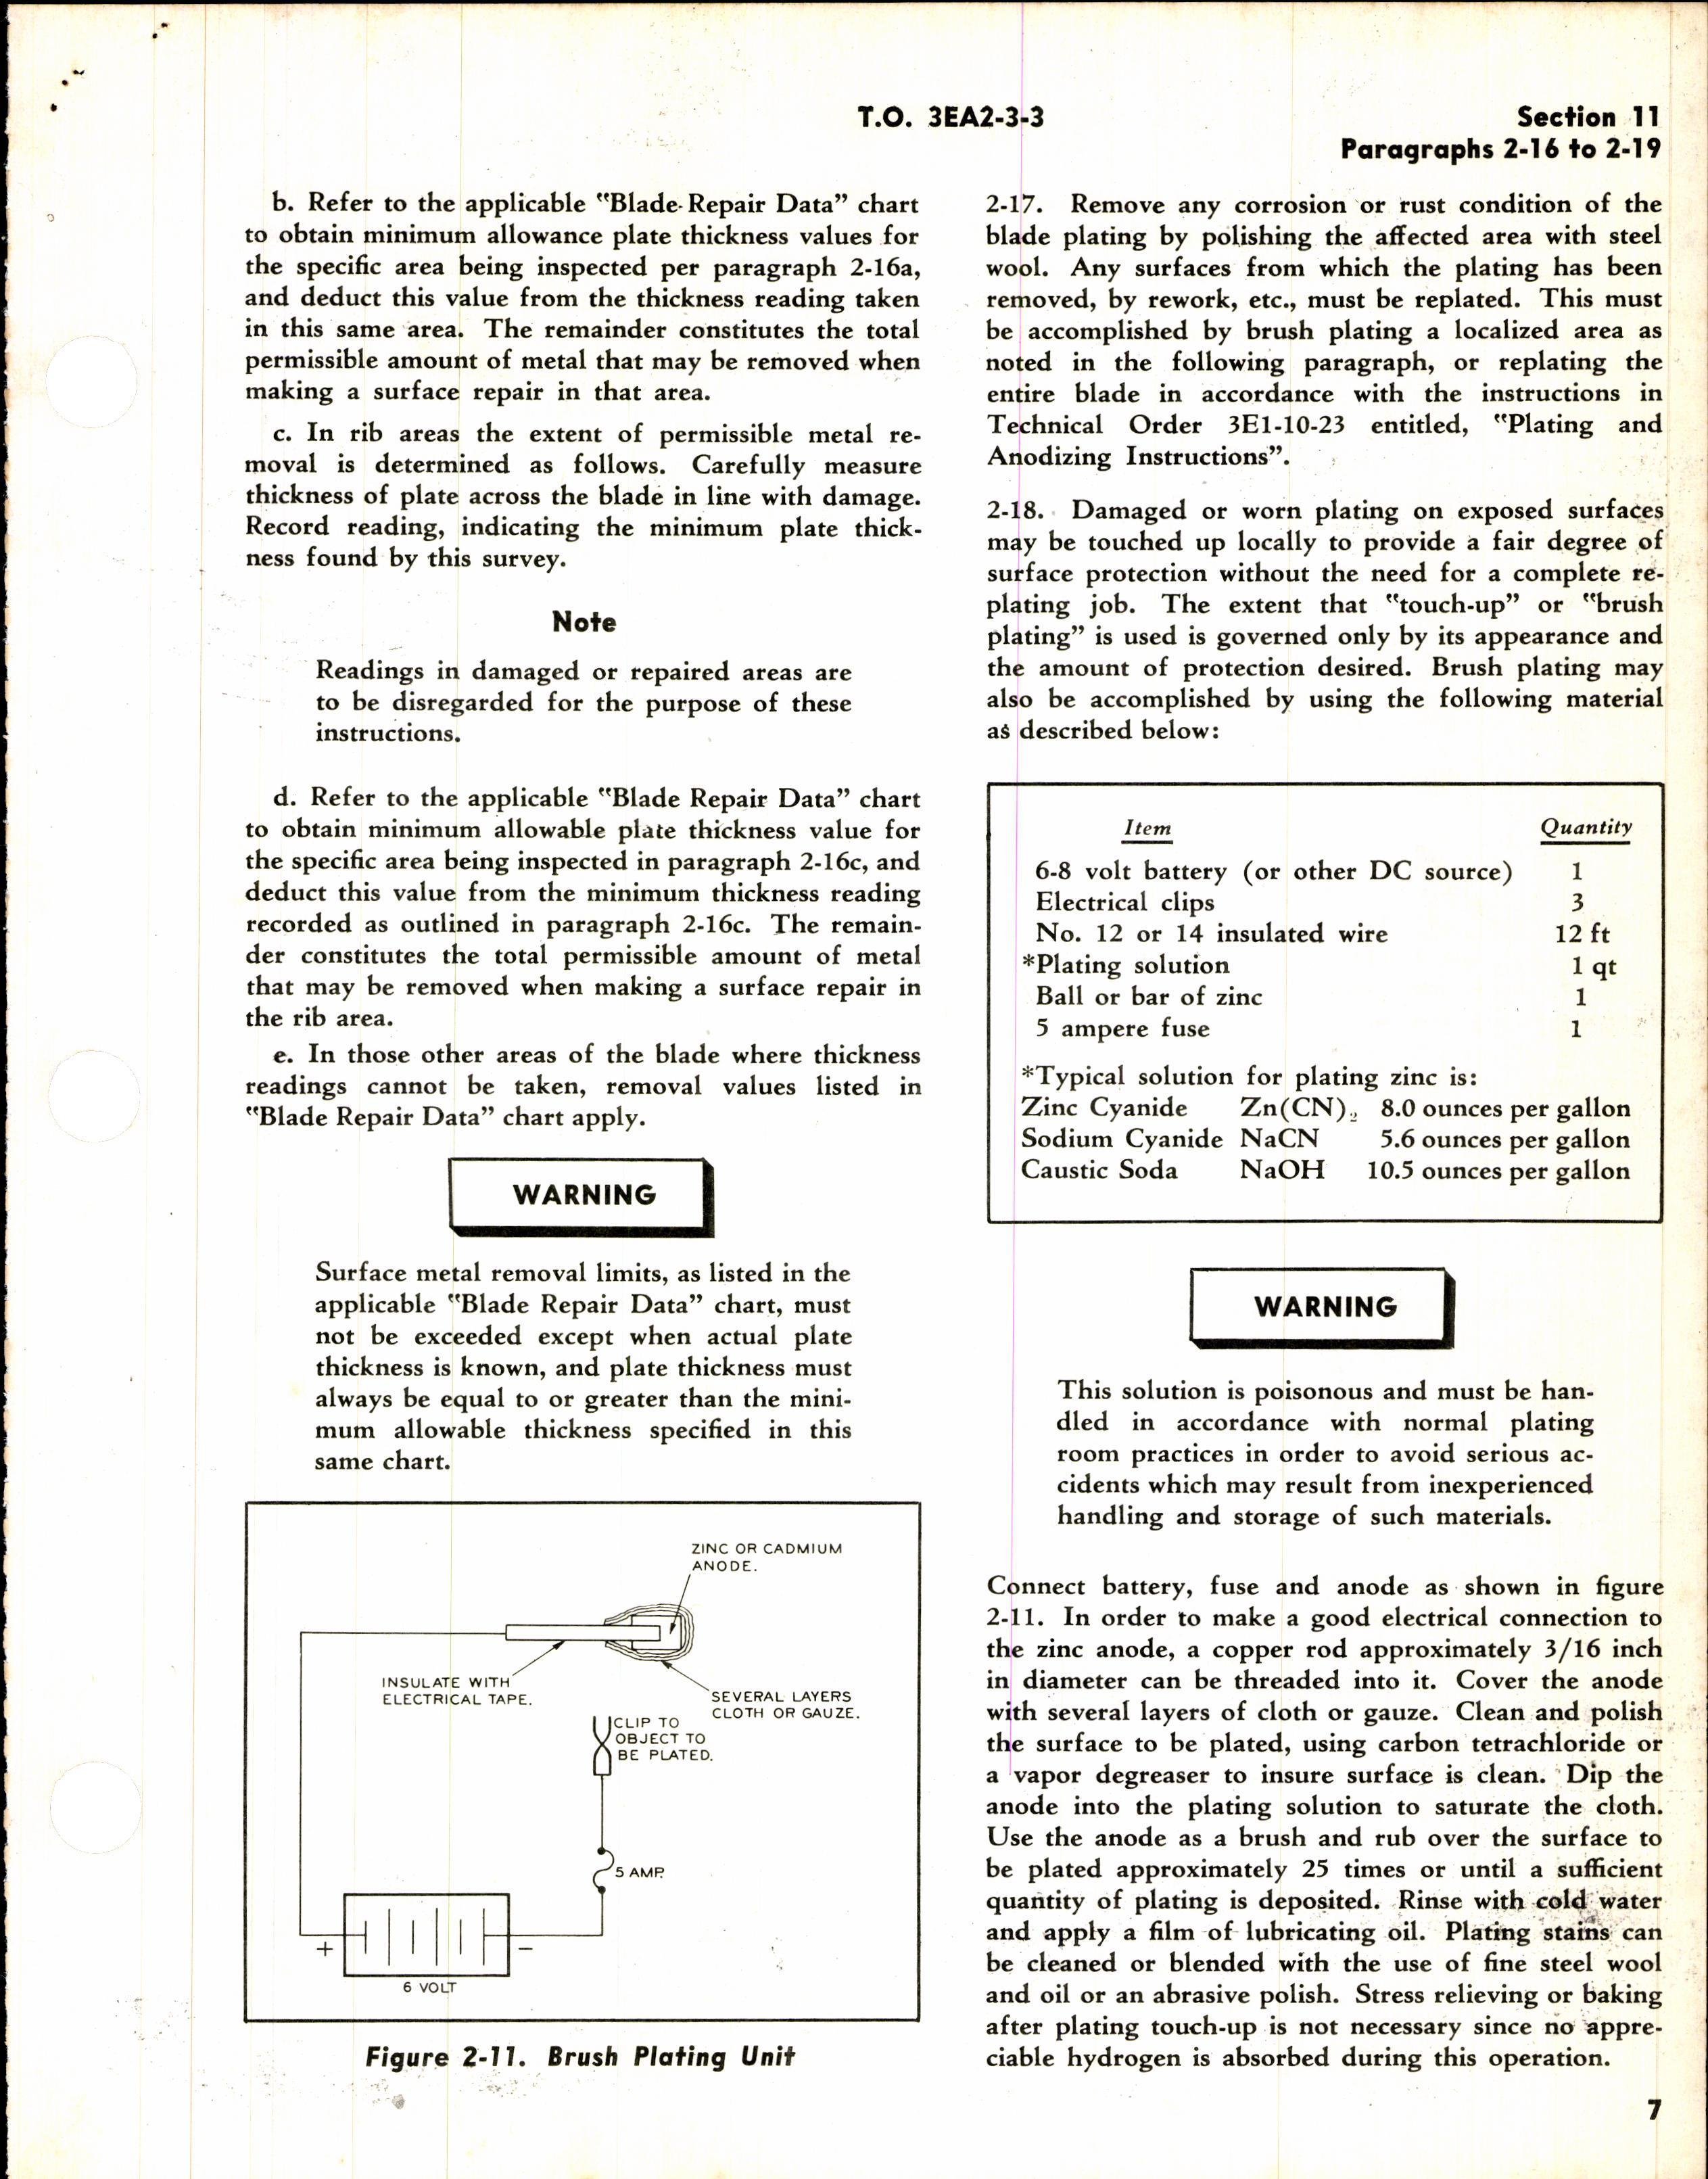 Sample page 5 from AirCorps Library document: Overhaul Instructions for Curtiss-Wright Blade Surface Repair